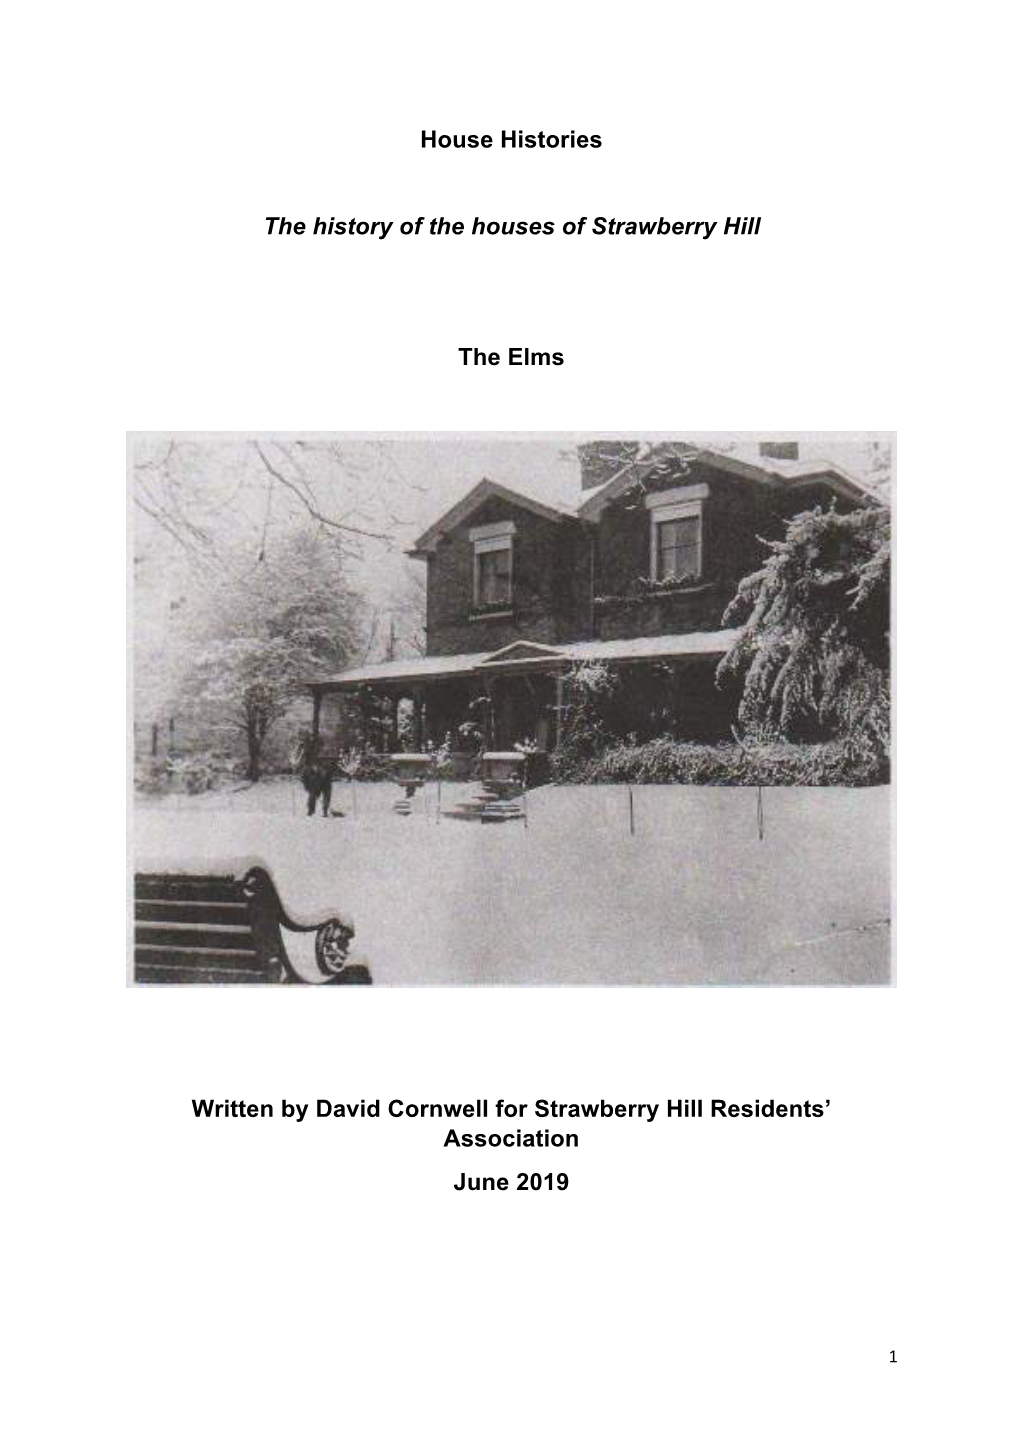 House Histories – the Elms in the Spring 2019 Issue of the Strawberry Hill Residents’ Association Bulletin an Offer Was Made to All Residents of the Area